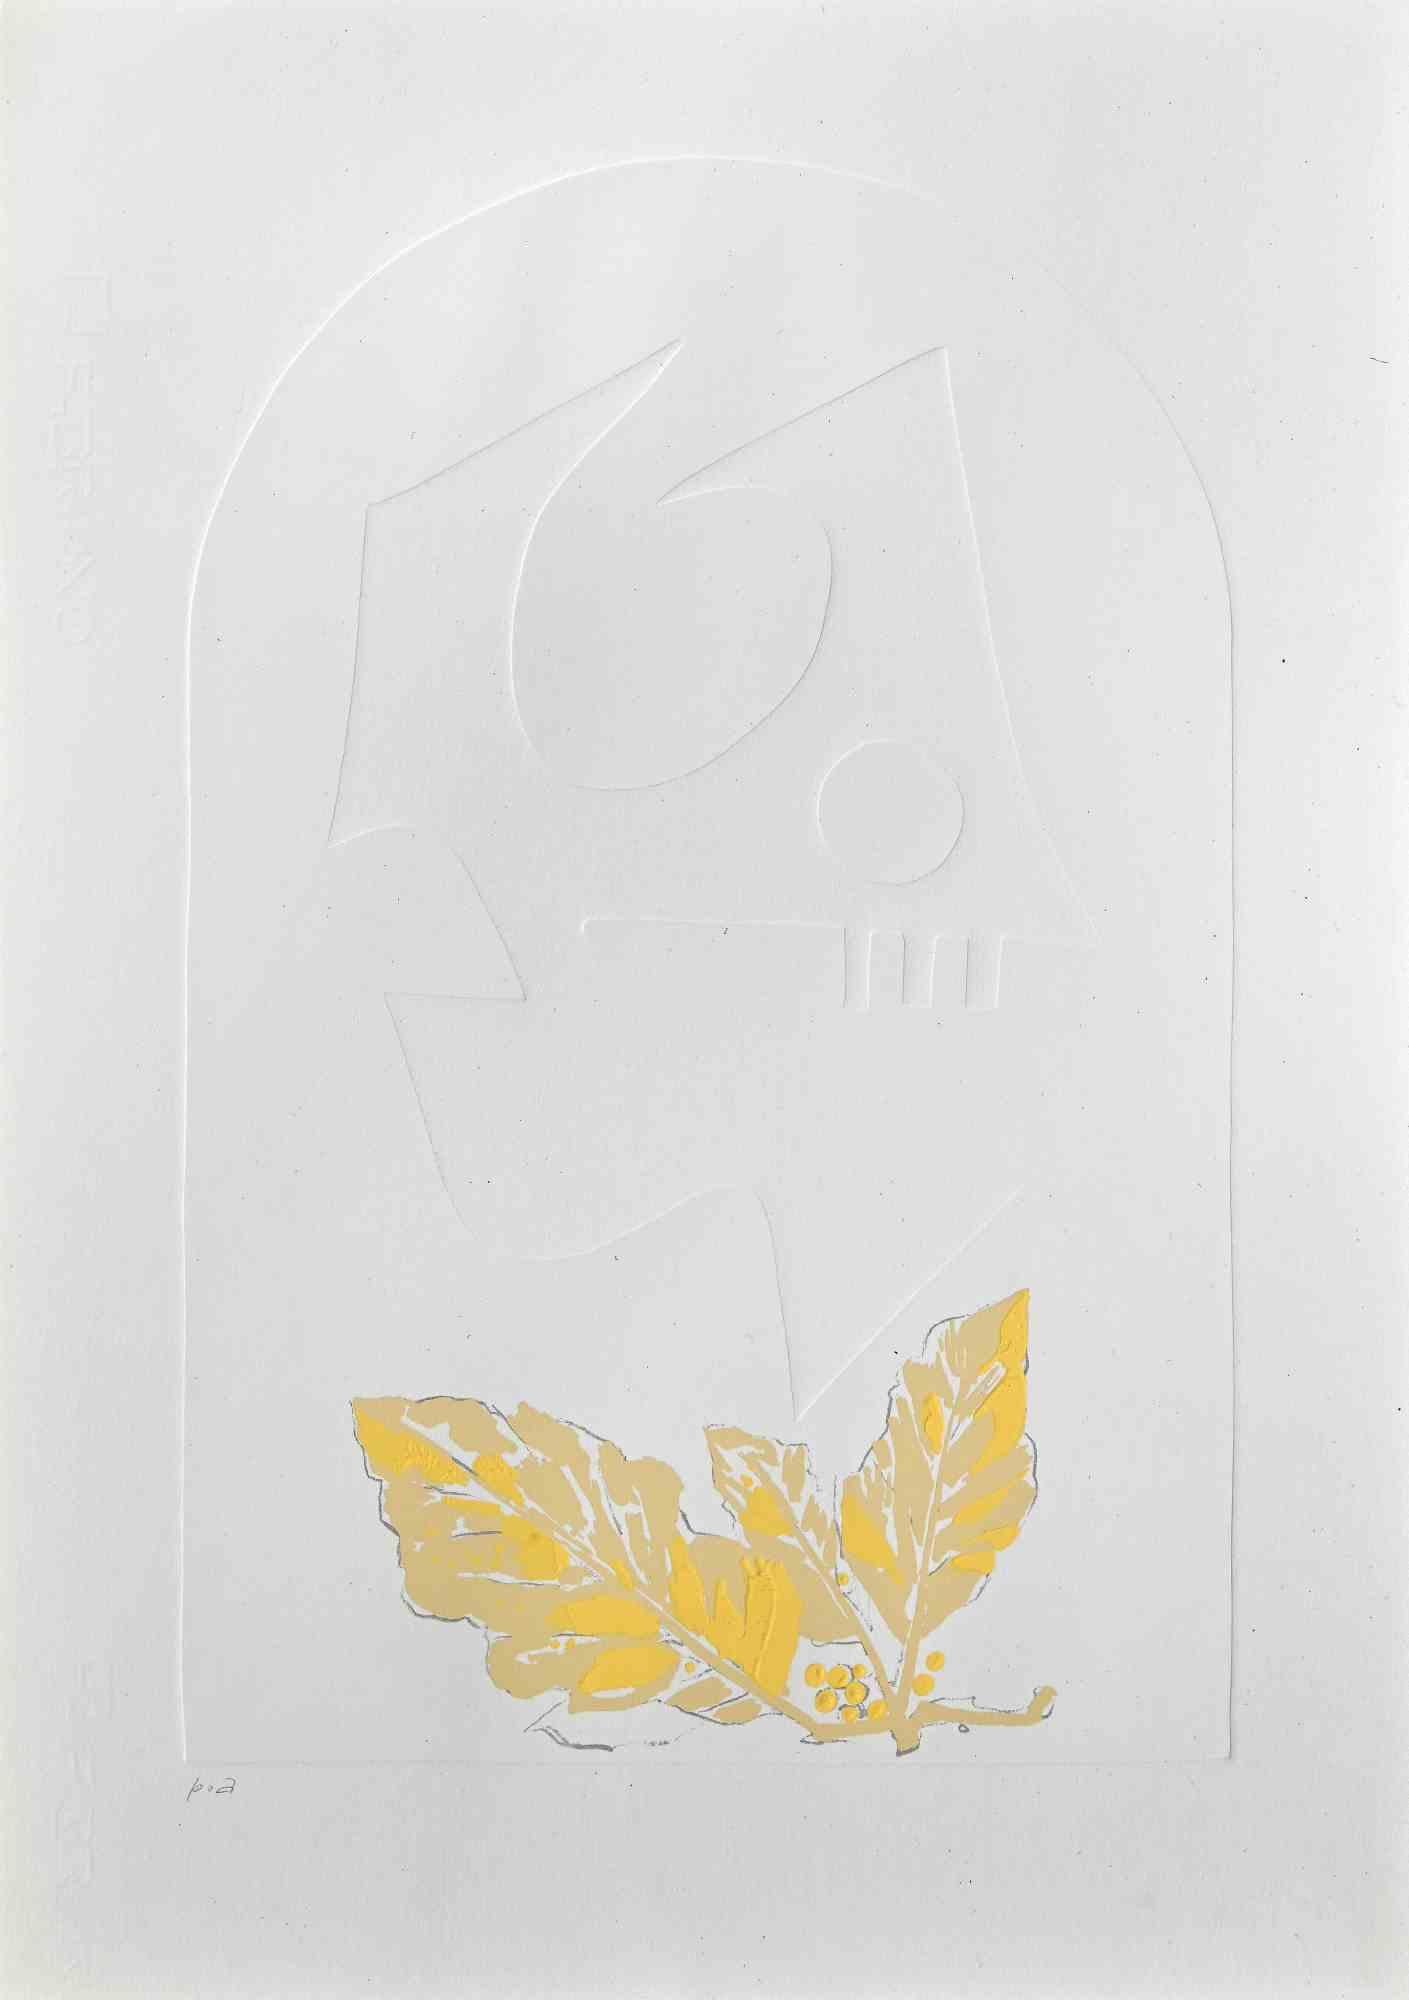 A yellow leaf is an artwork realized byLeo Guida, 1970s. 

Screenprint and embossing 50 x 35 cm.

Good conditions!